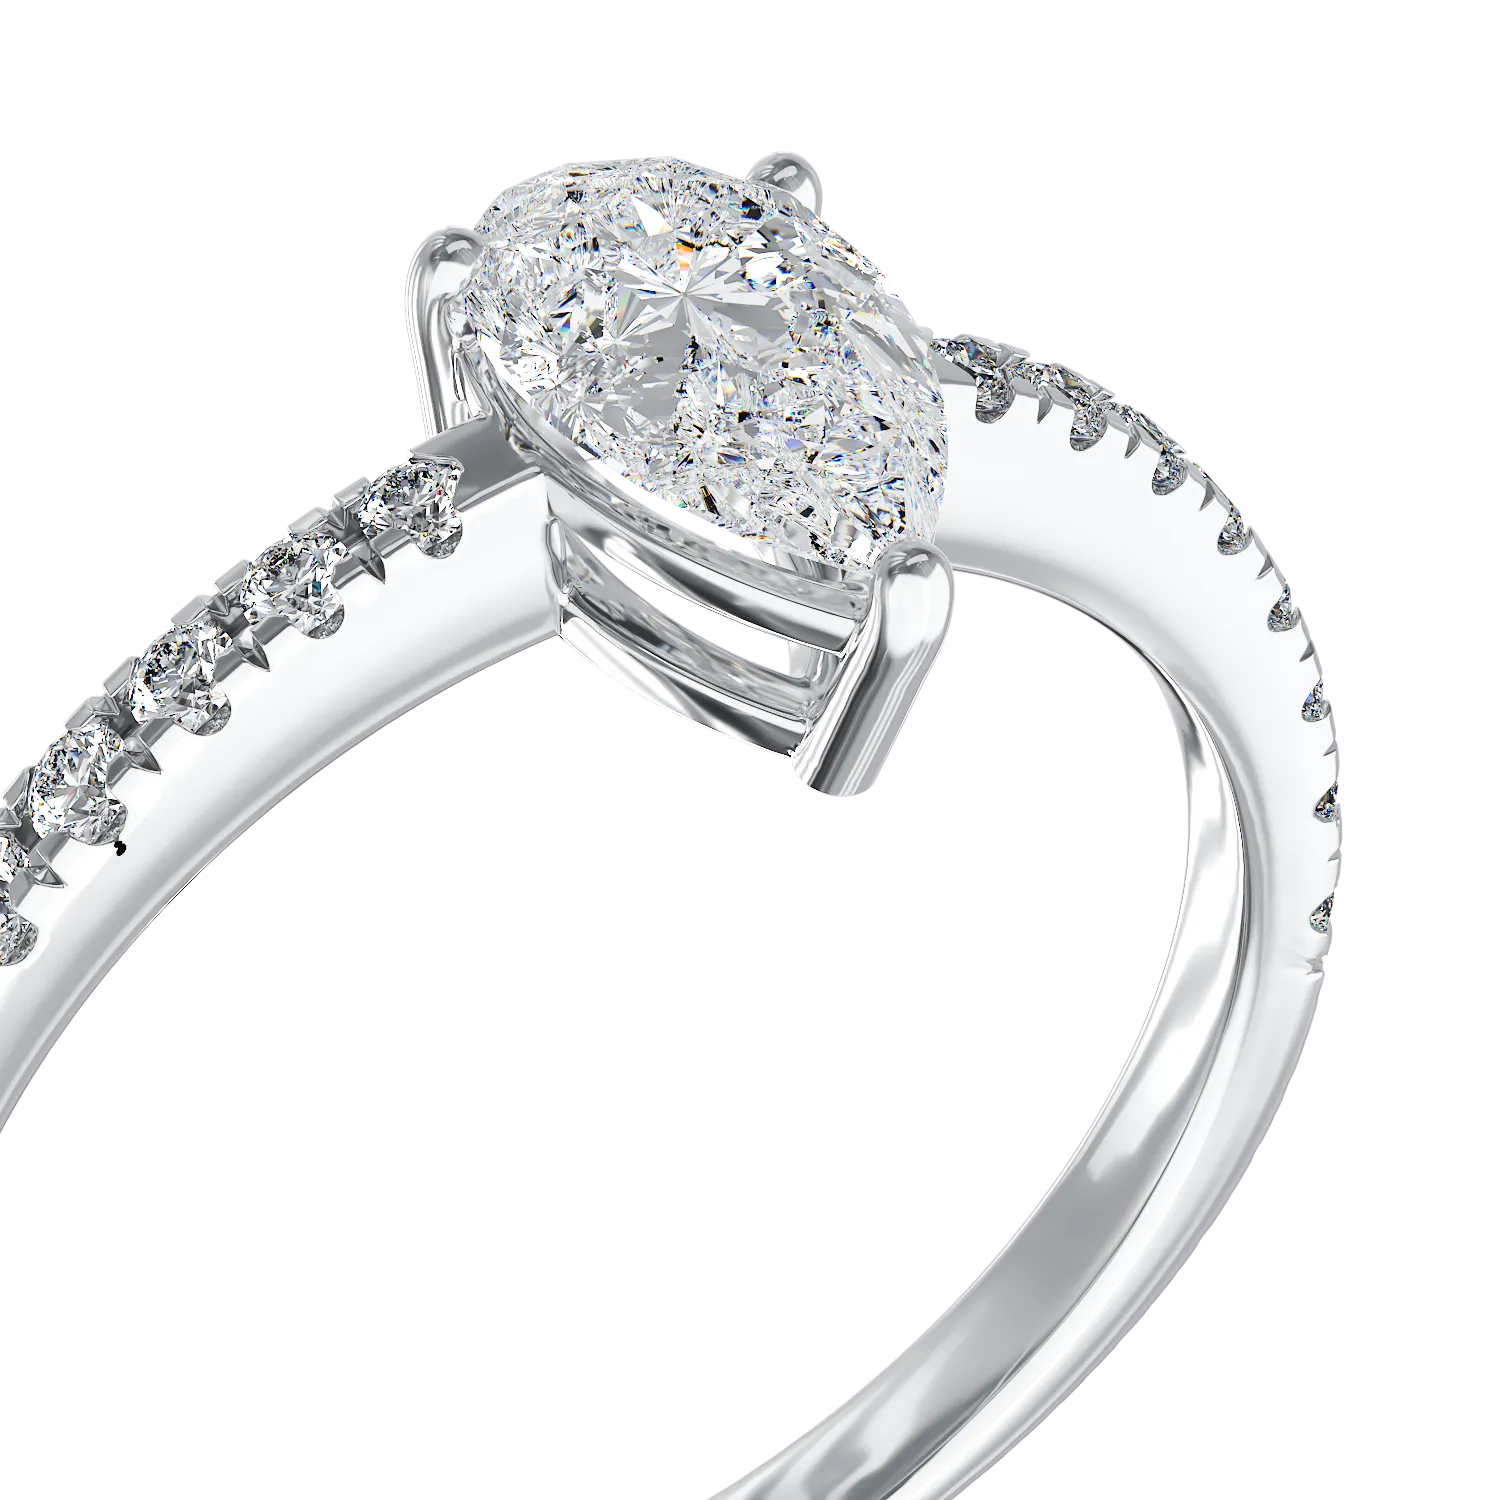 18K white gold engagement ring with 0.5ct diamond and 0.22ct diamonds